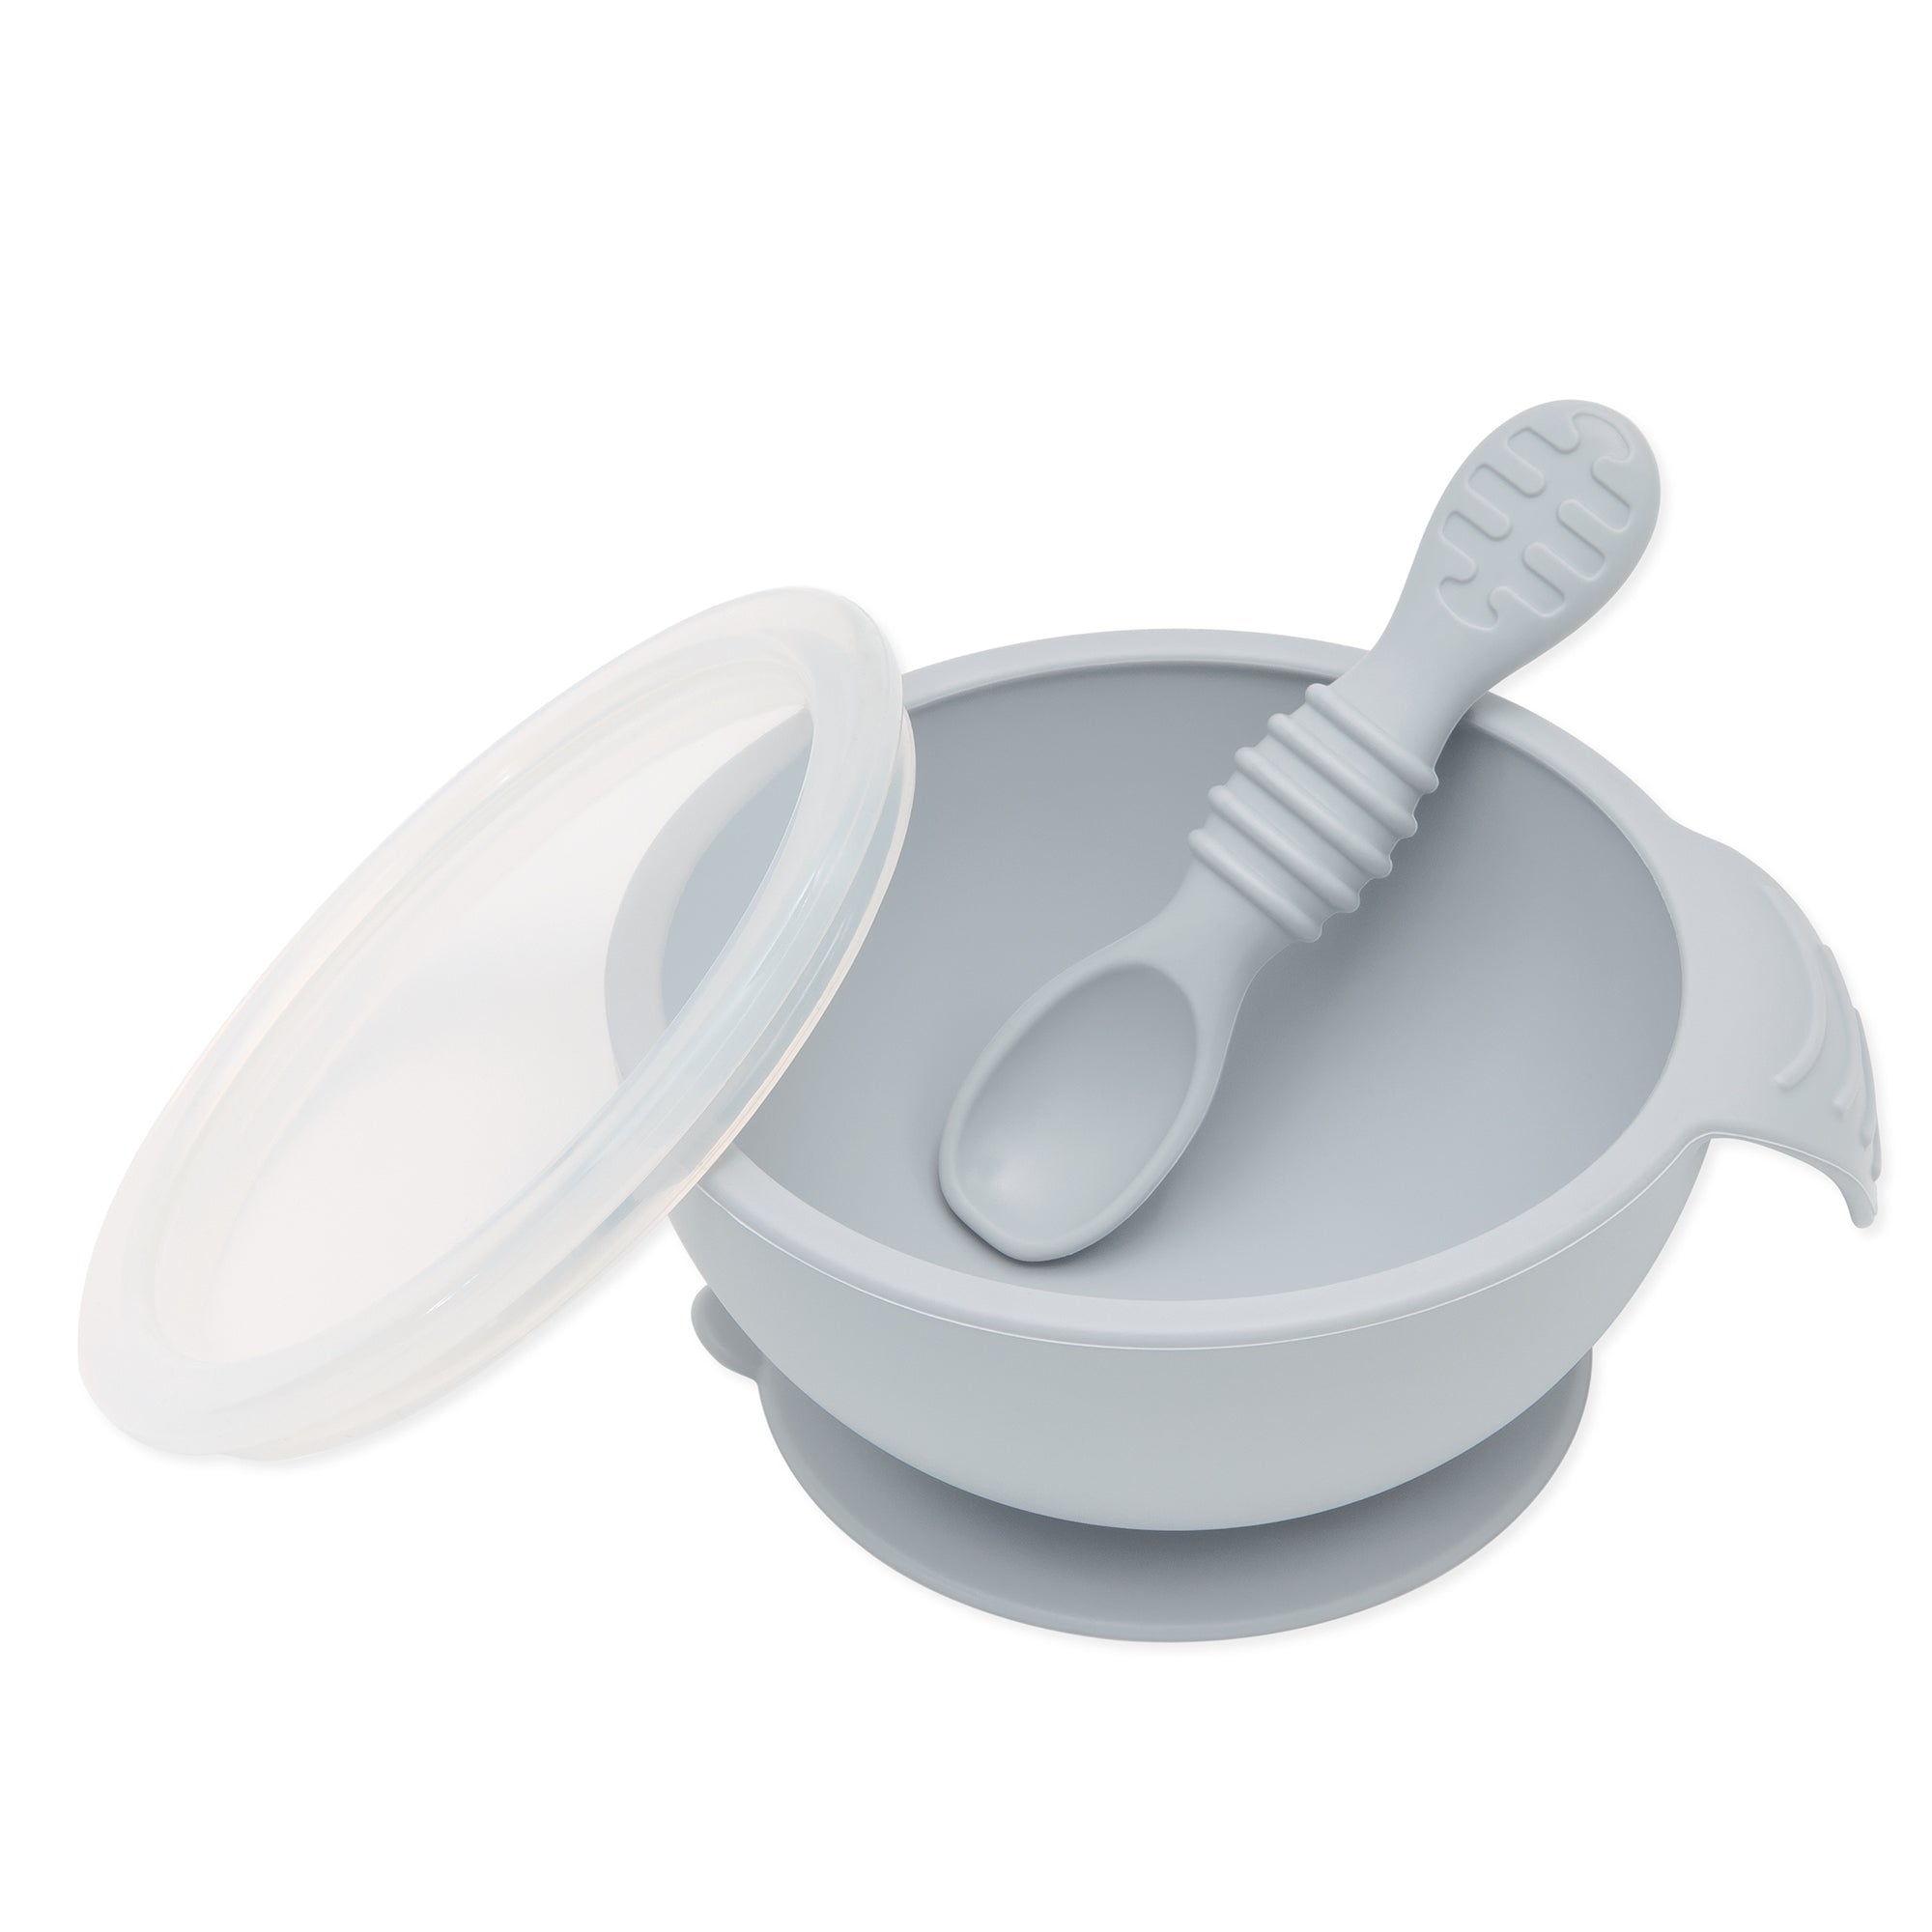 Baby's First Feeding Set, Blue Baby Bowl, Spoon & Lid